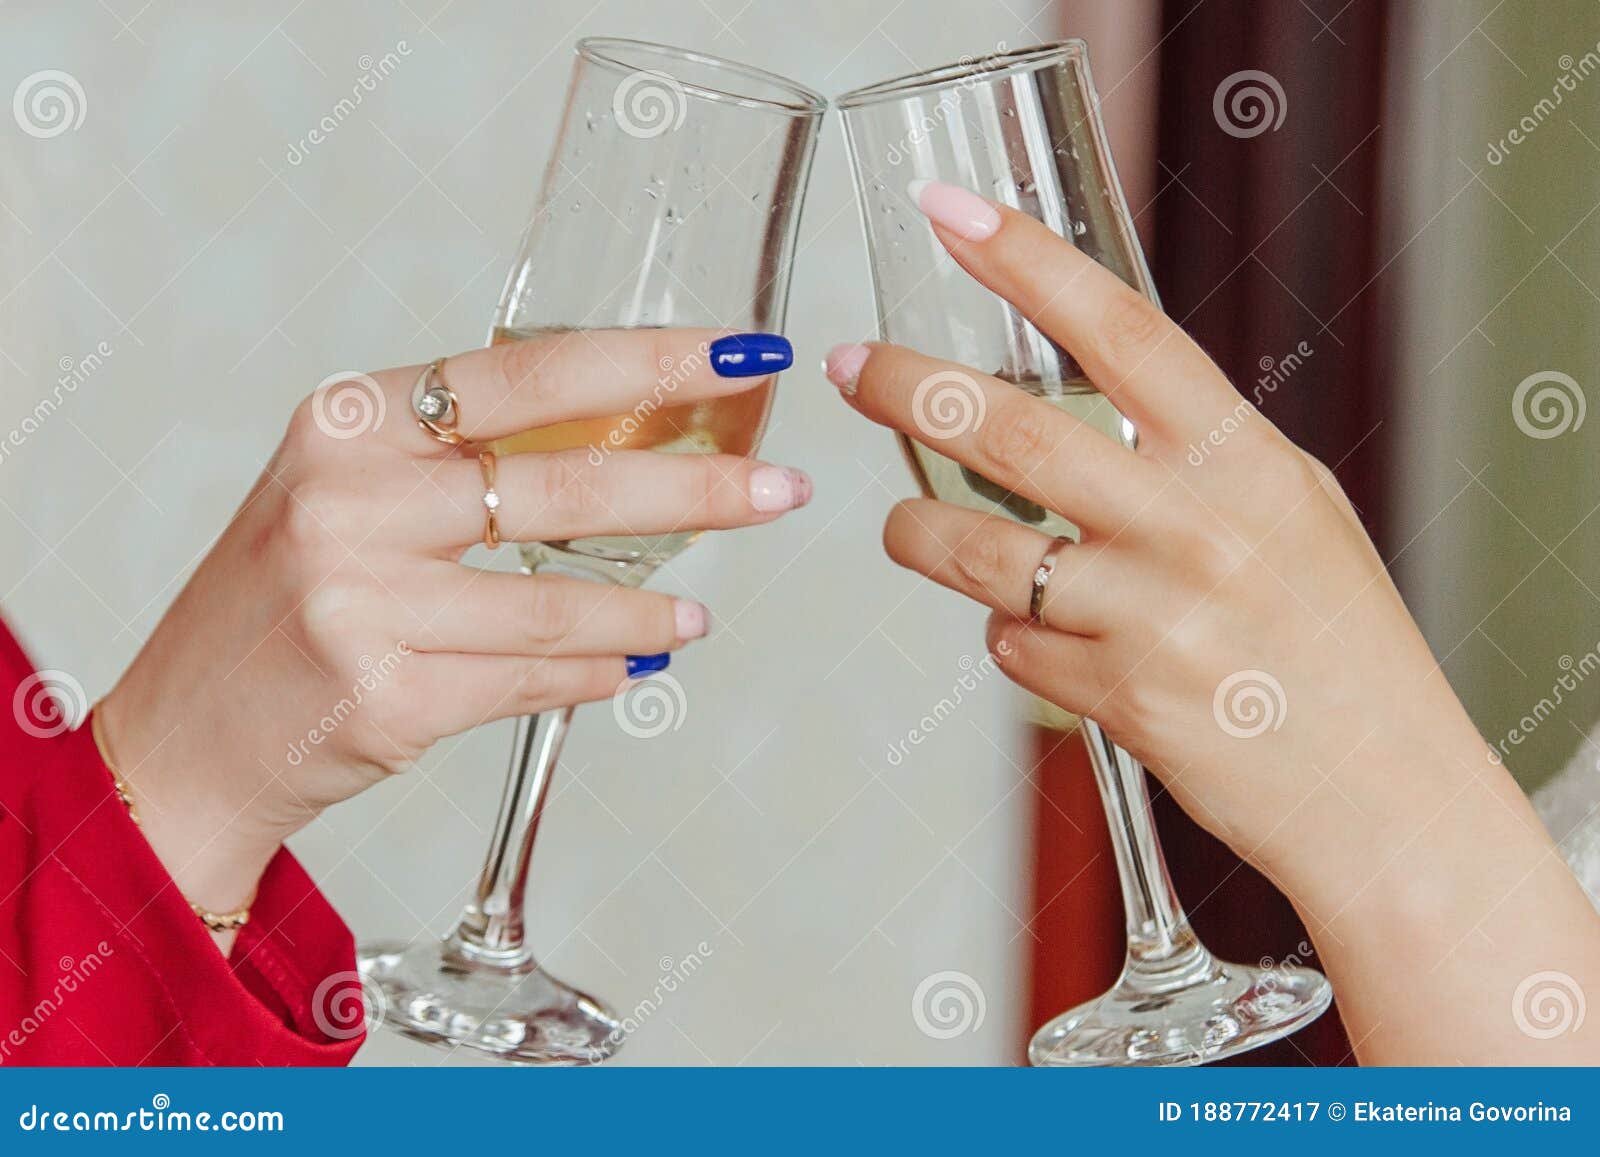 Clinking Glasses Of Champagne In Hands Of Two Women Stock Image